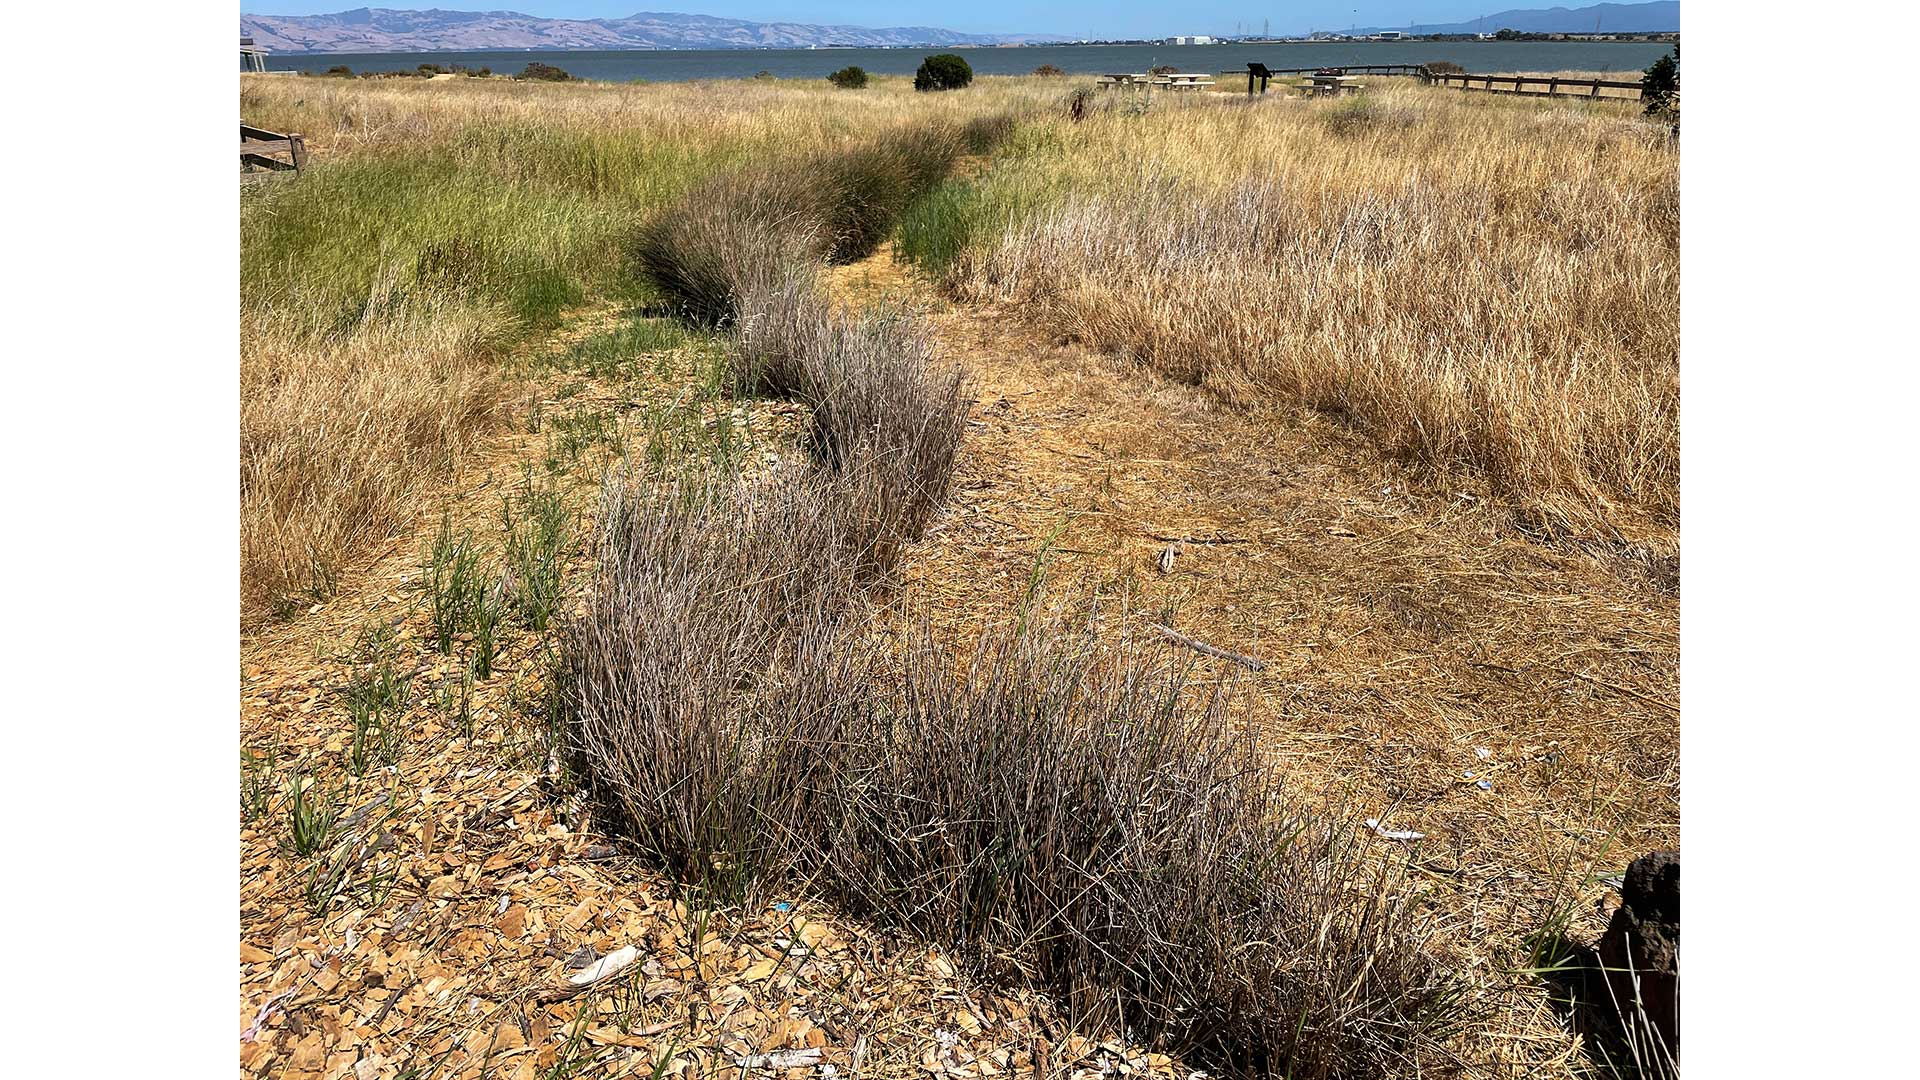 Juncus at Cooley Landing looking dry from three years of drought.